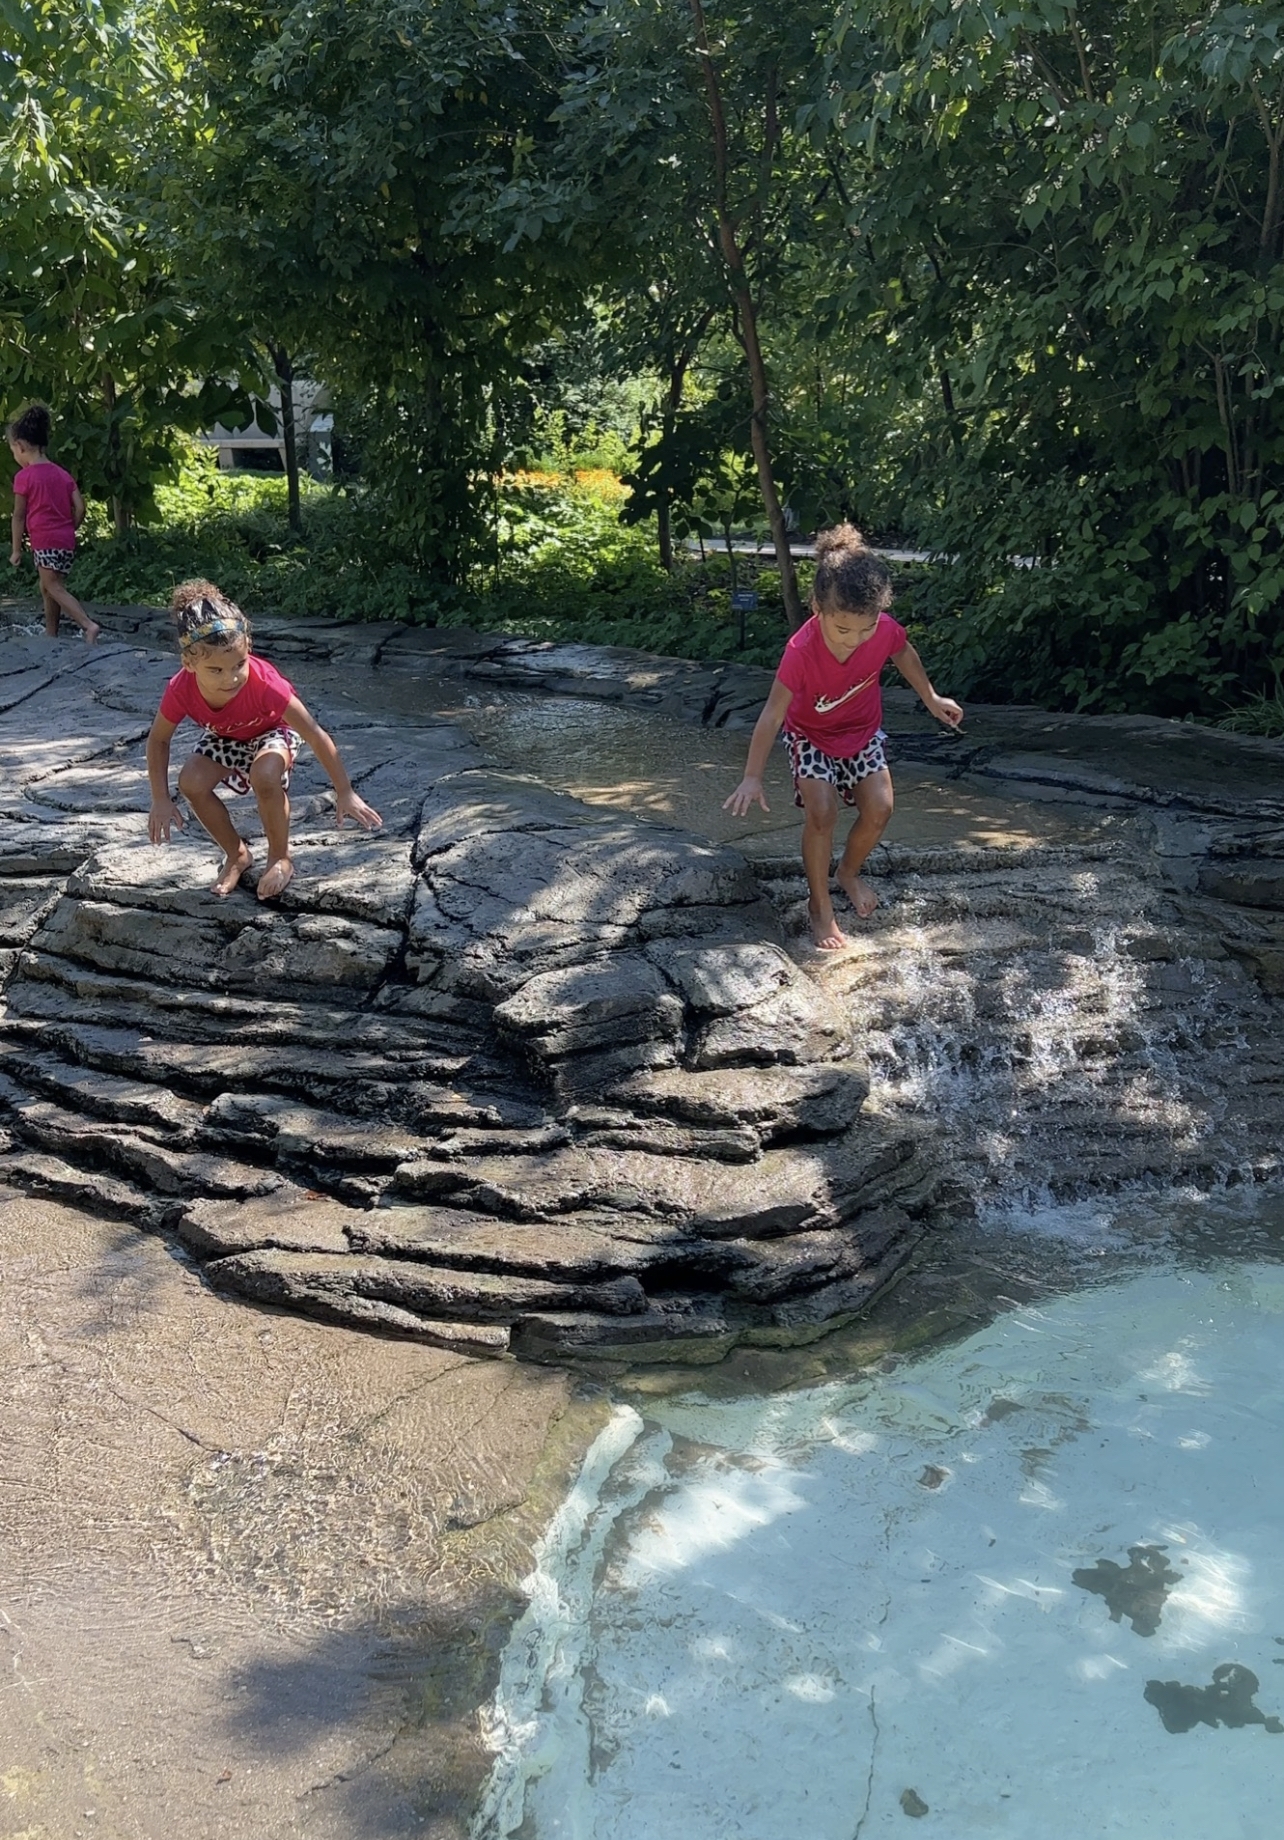 Dive into Learning and Fun with Monthly Themes and Water Features at Franklin Park Conservatory’s Children’s Garden